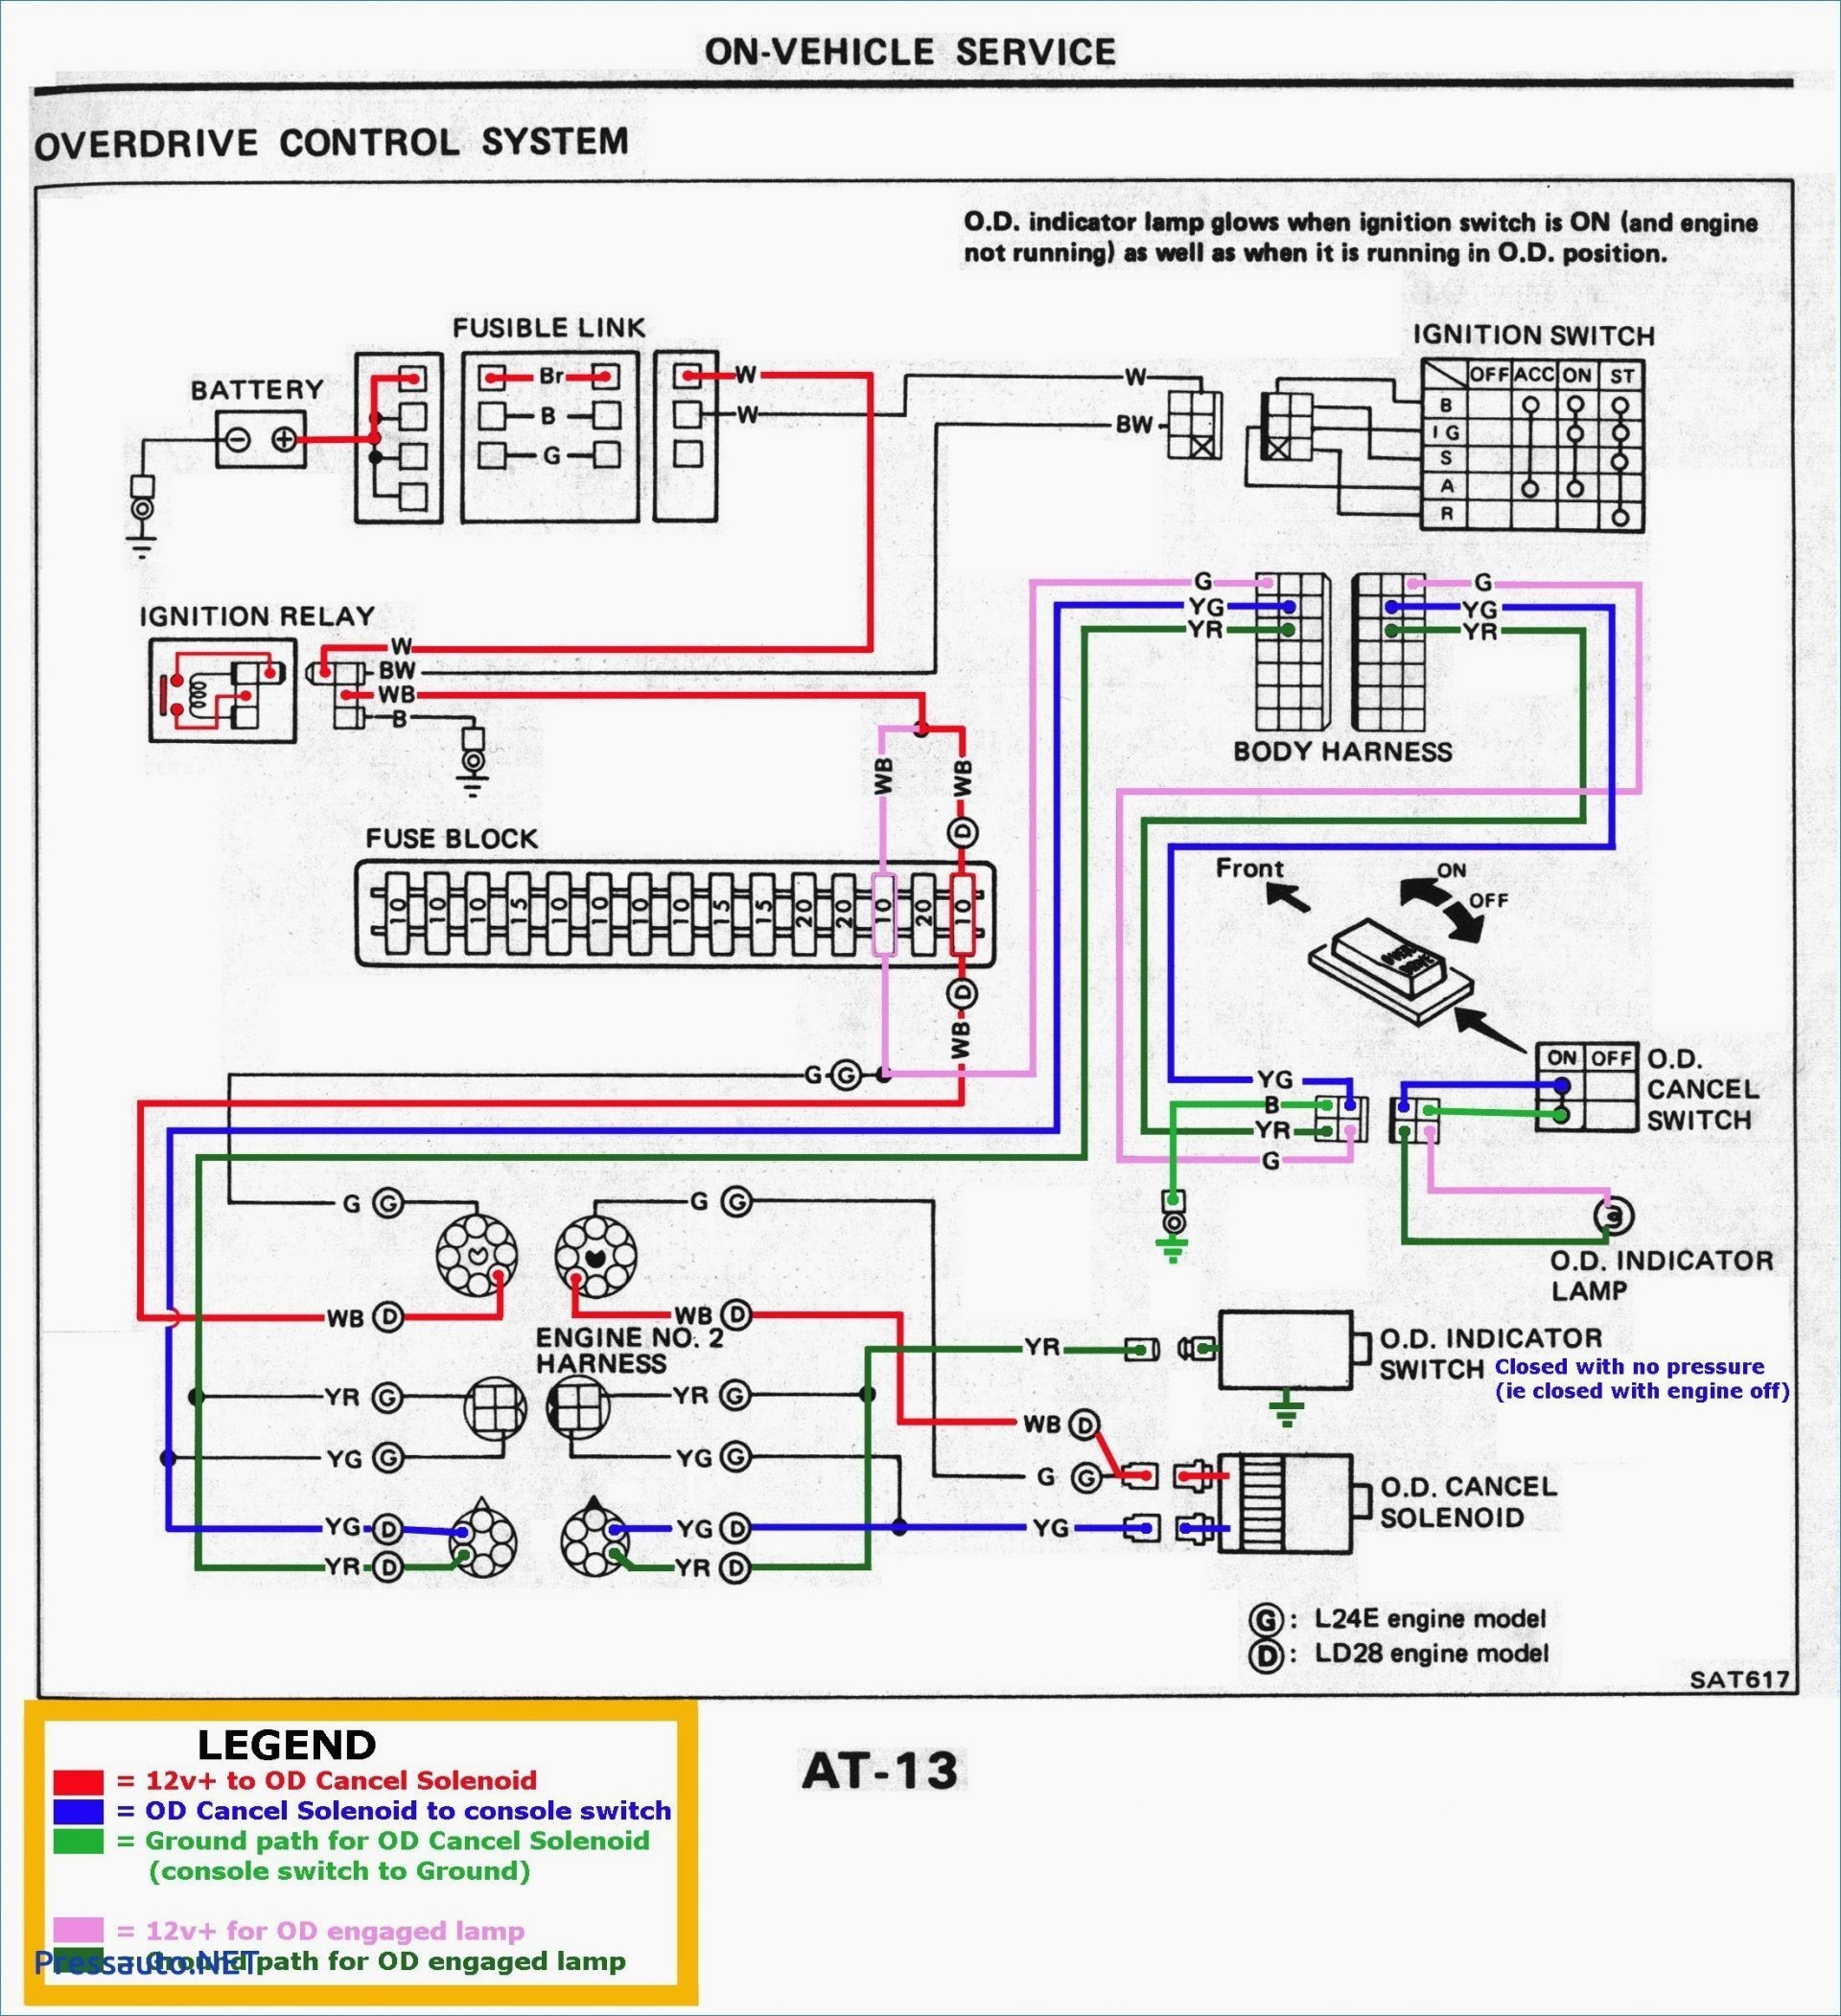 2003 Chevy Trailblazer Tail Light Wiring Diagram for Rear Trailer Lights Save 2003 S10 Tail Lights